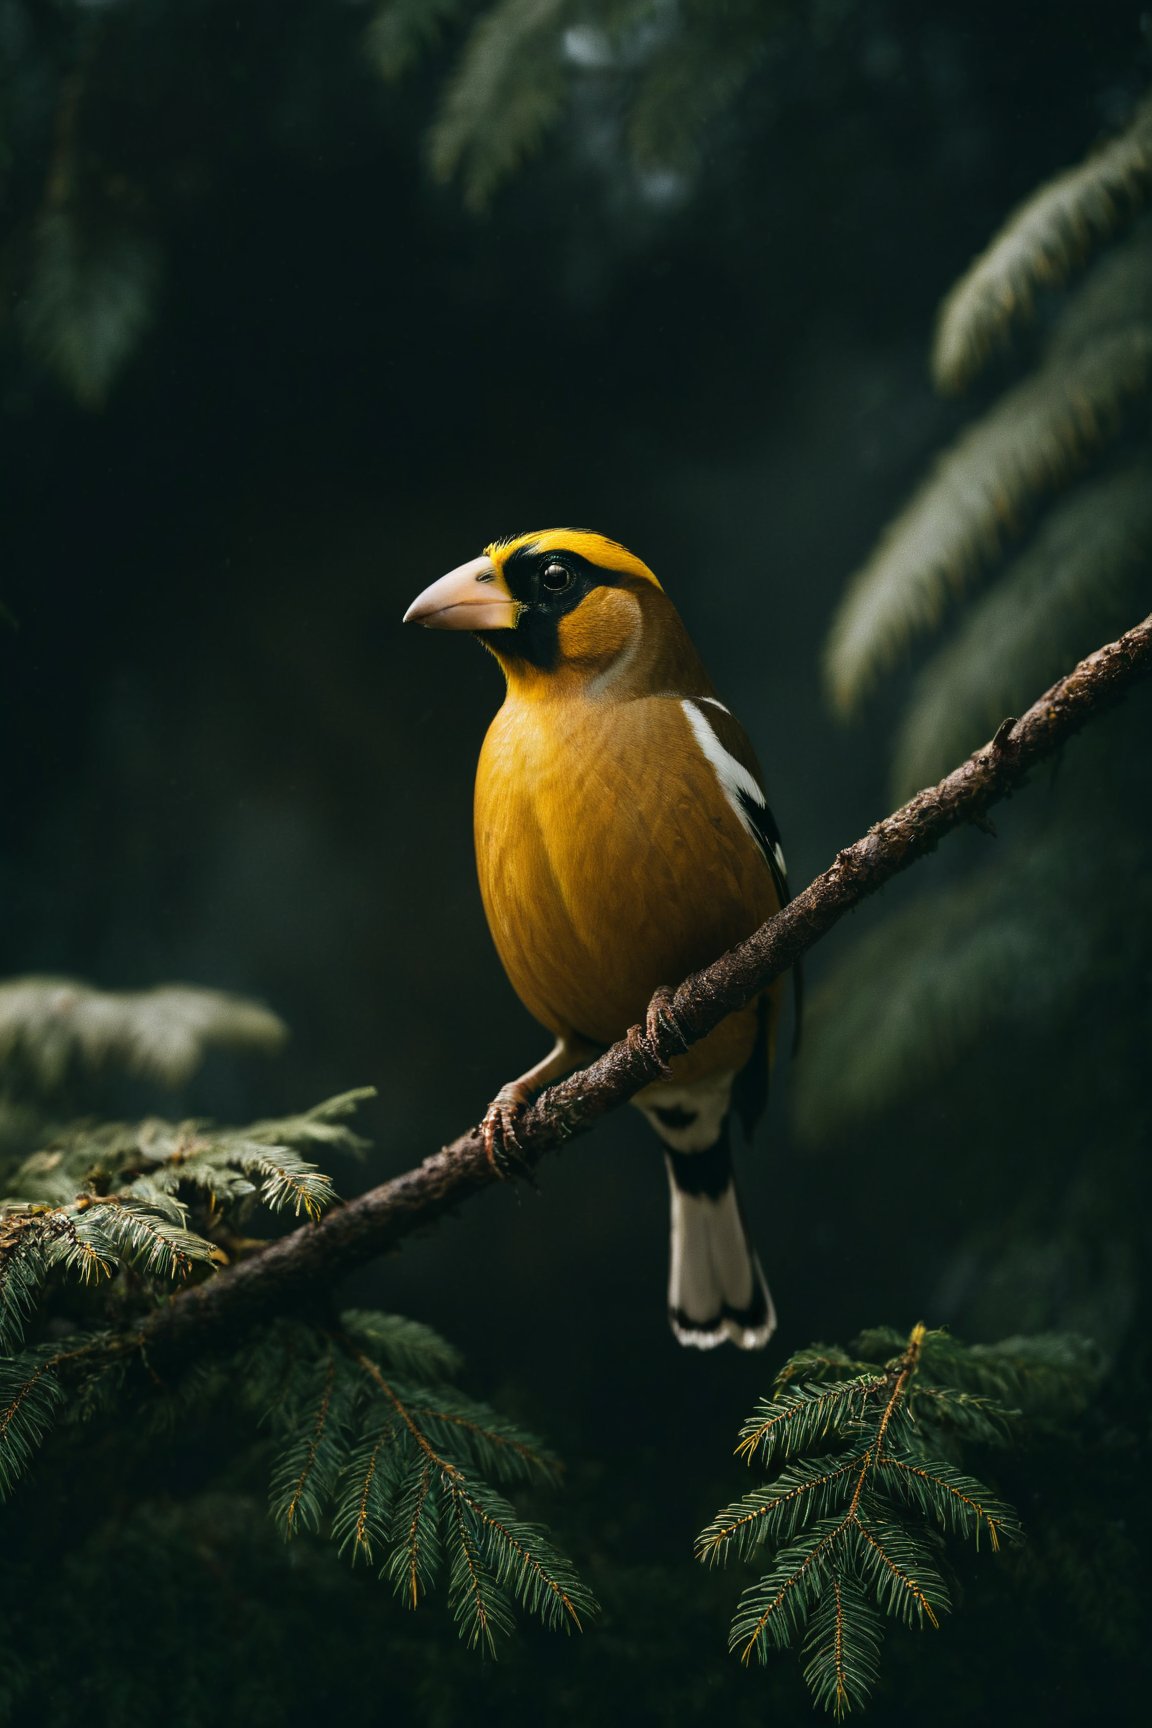 dark moody atmosphere,dark and moody,National Geography, Award winning pan shot of a Evening Grosbeak in the wild, full-body, atmospheric lighting. by pascal julio and nadine albuquerque, 2000s vintage RAW photo, photorealistic, film grain, candid camera, color graded cinematic, eye catchlights, atmospheric lighting, imperfections, natural, shallow dof, High level of detail to create a photographic-like image, focusing on lighting, realistic textures, hyperdetailed.
